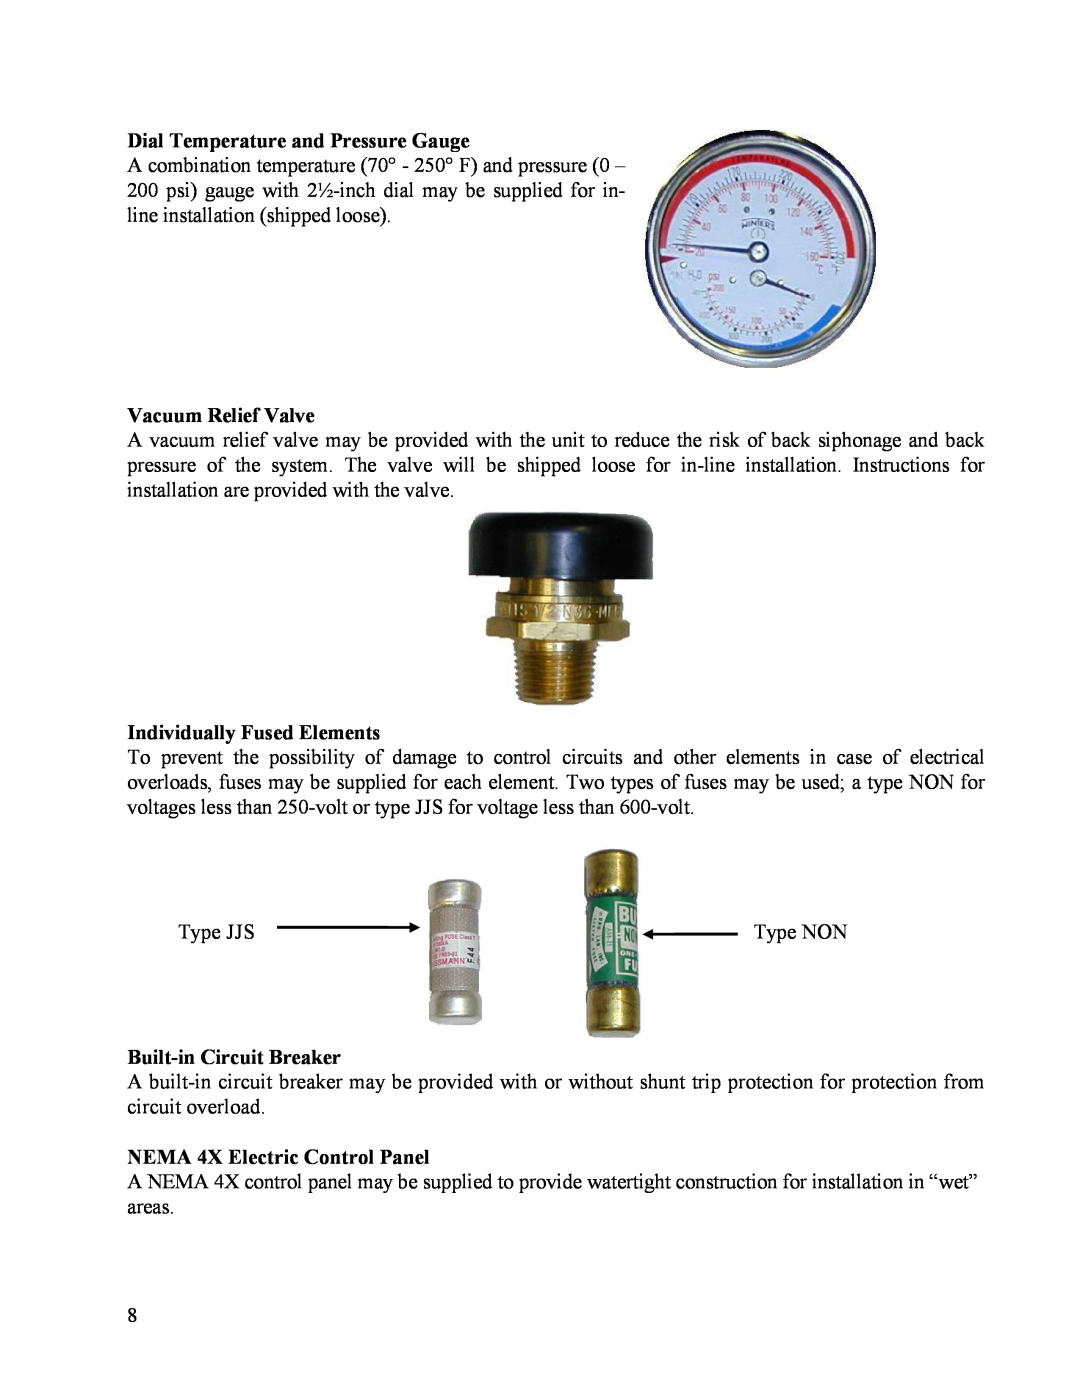 Hubbell Electric Heater Company V20 Dial Temperature and Pressure Gauge, Vacuum Relief Valve, Individually Fused Elements 